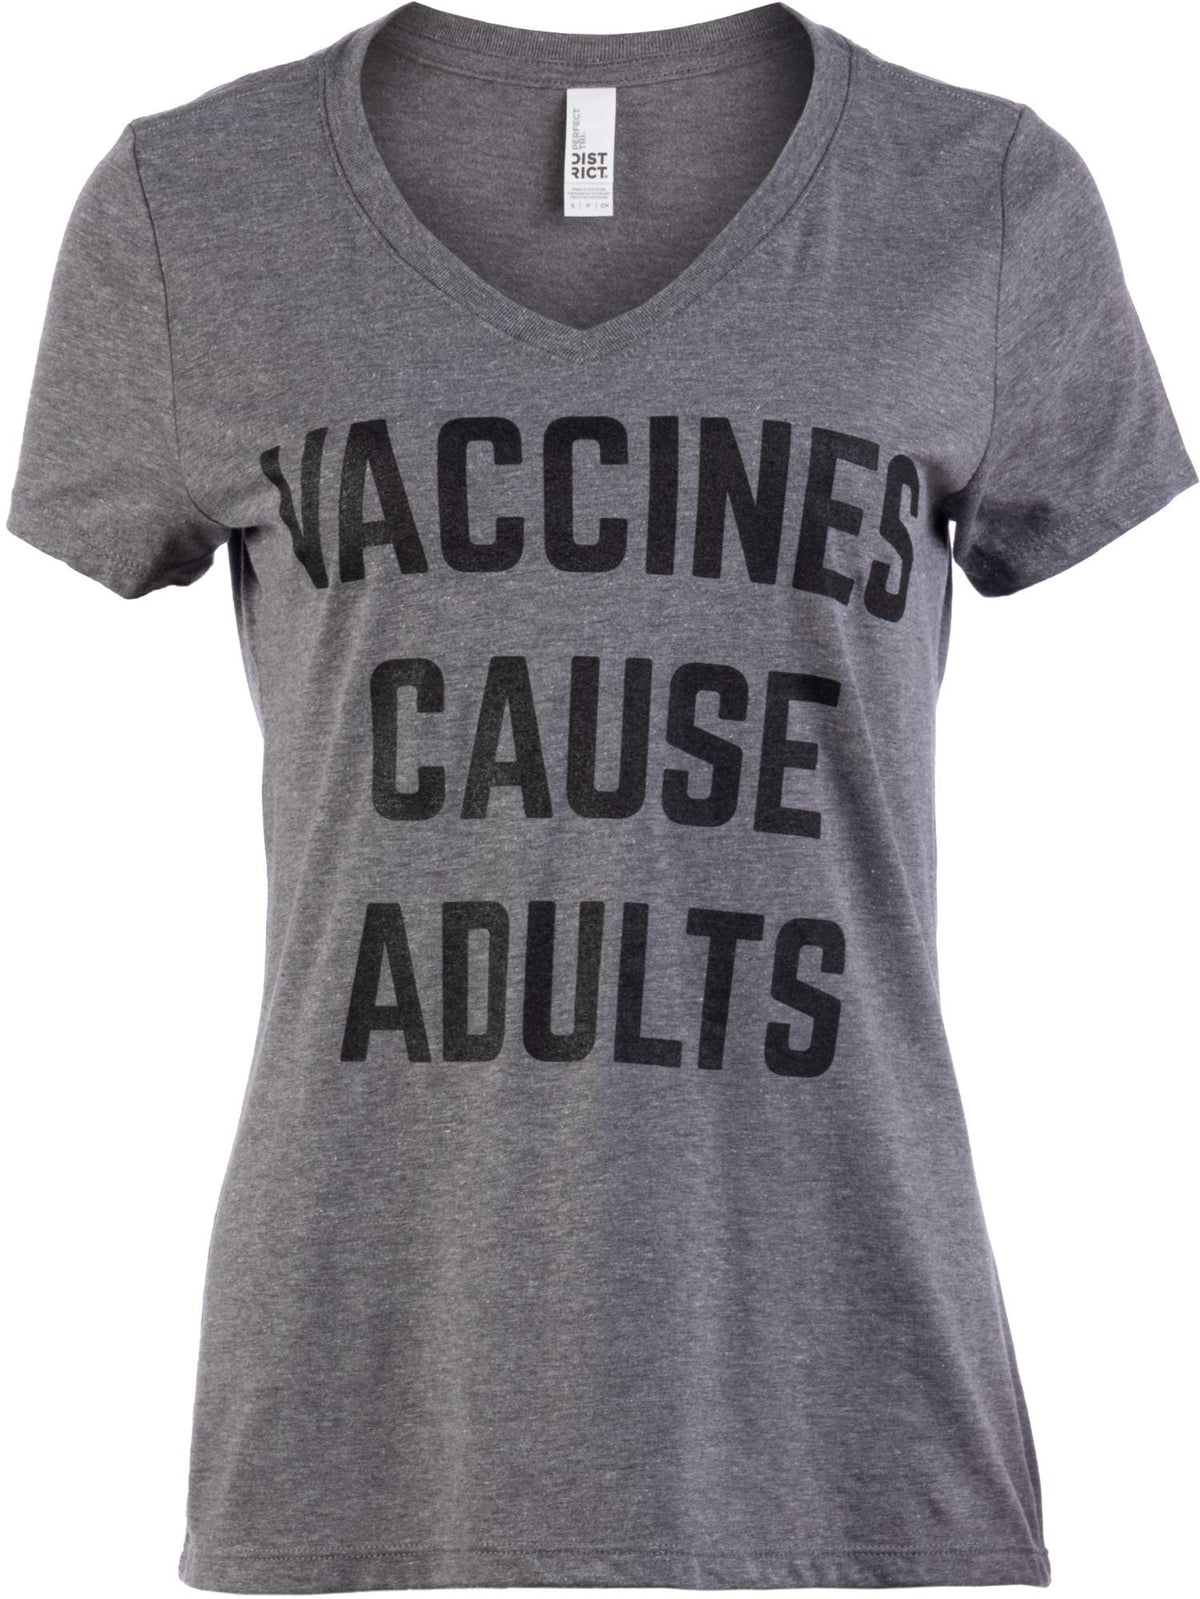 Vaccines Cause Adults | Funny Doctor Nurse Science Humor V-Neck T-Shirt - Women's